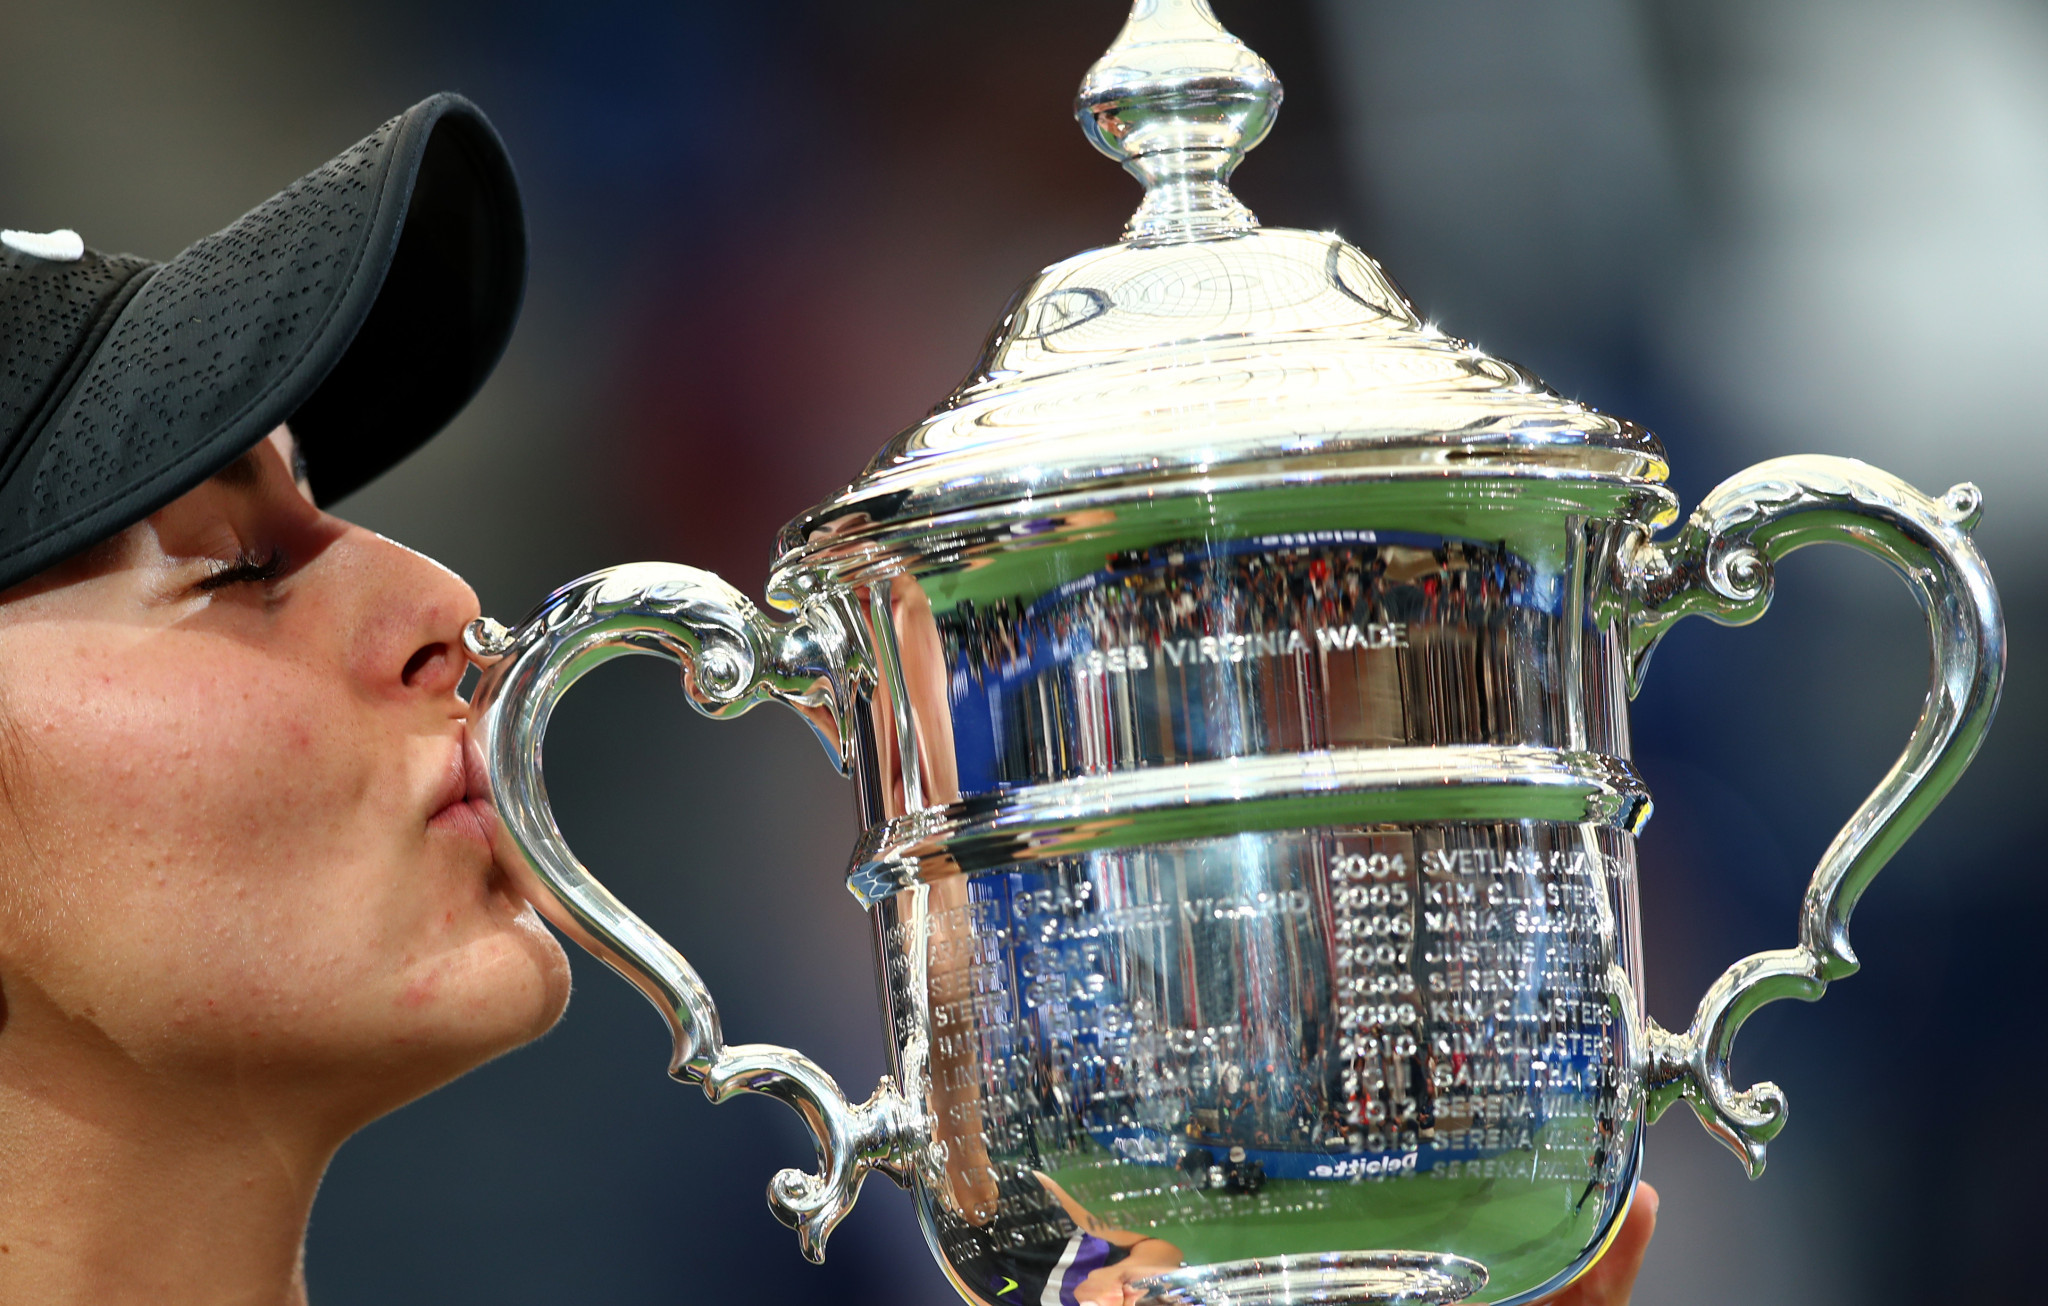 Bianca Andreescu of Canada won her first Grand Slam title at the US Open ©Getty Images